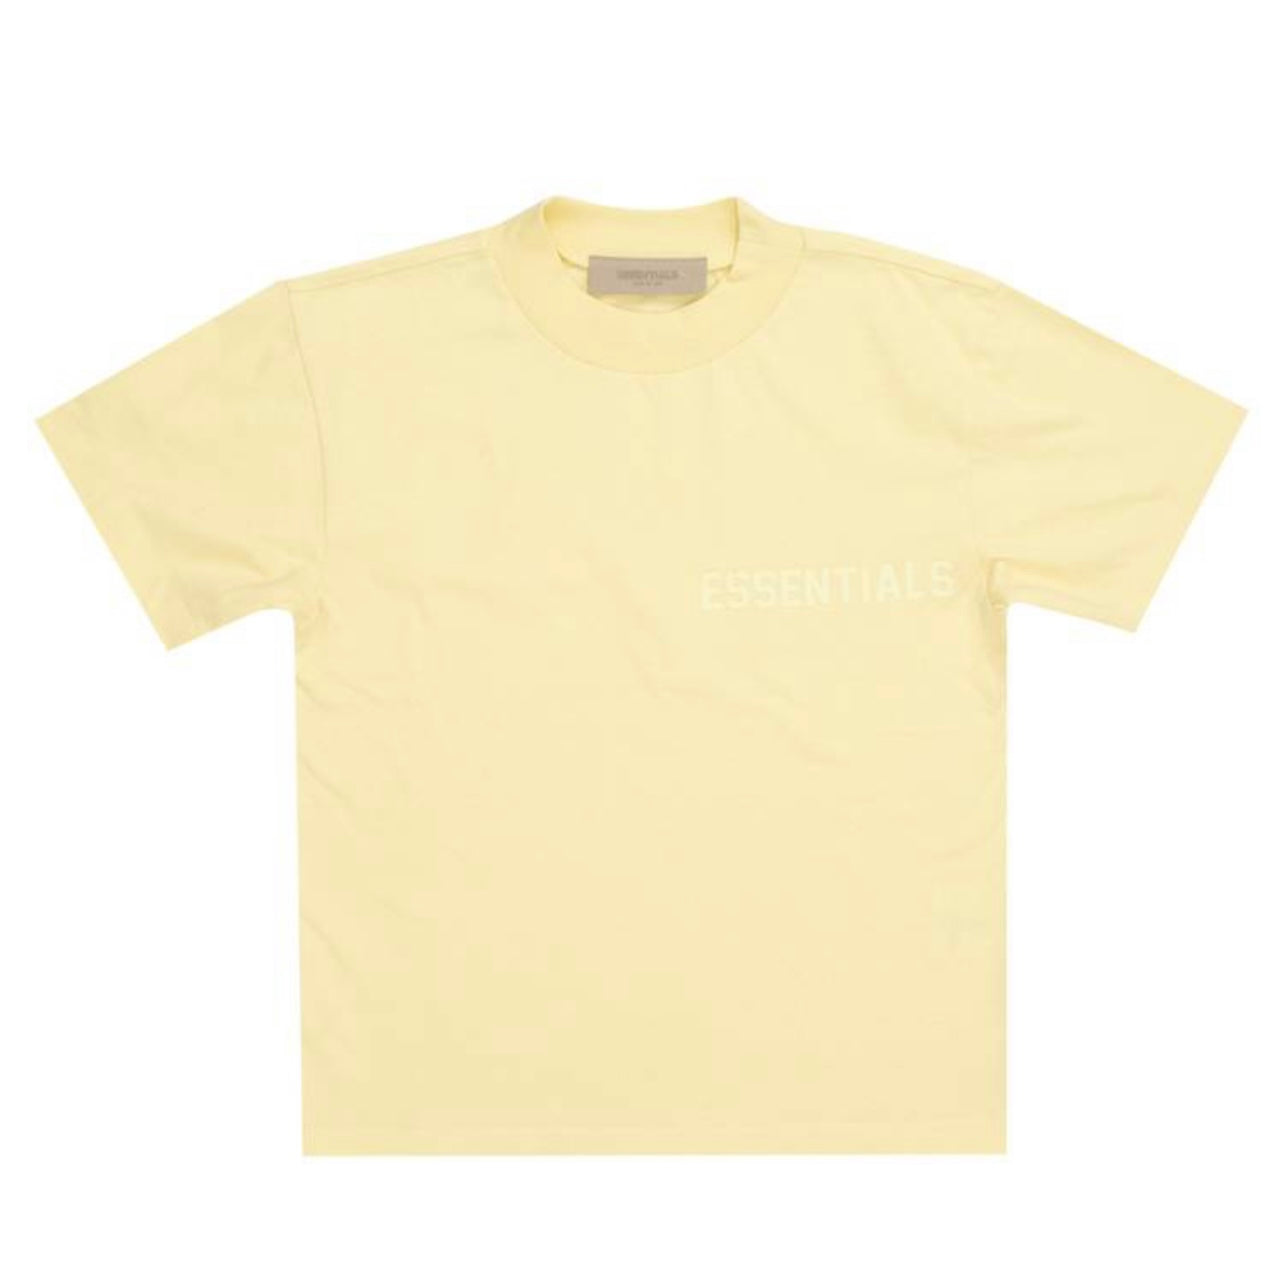 Fear of God Essentials Tee “Canary”